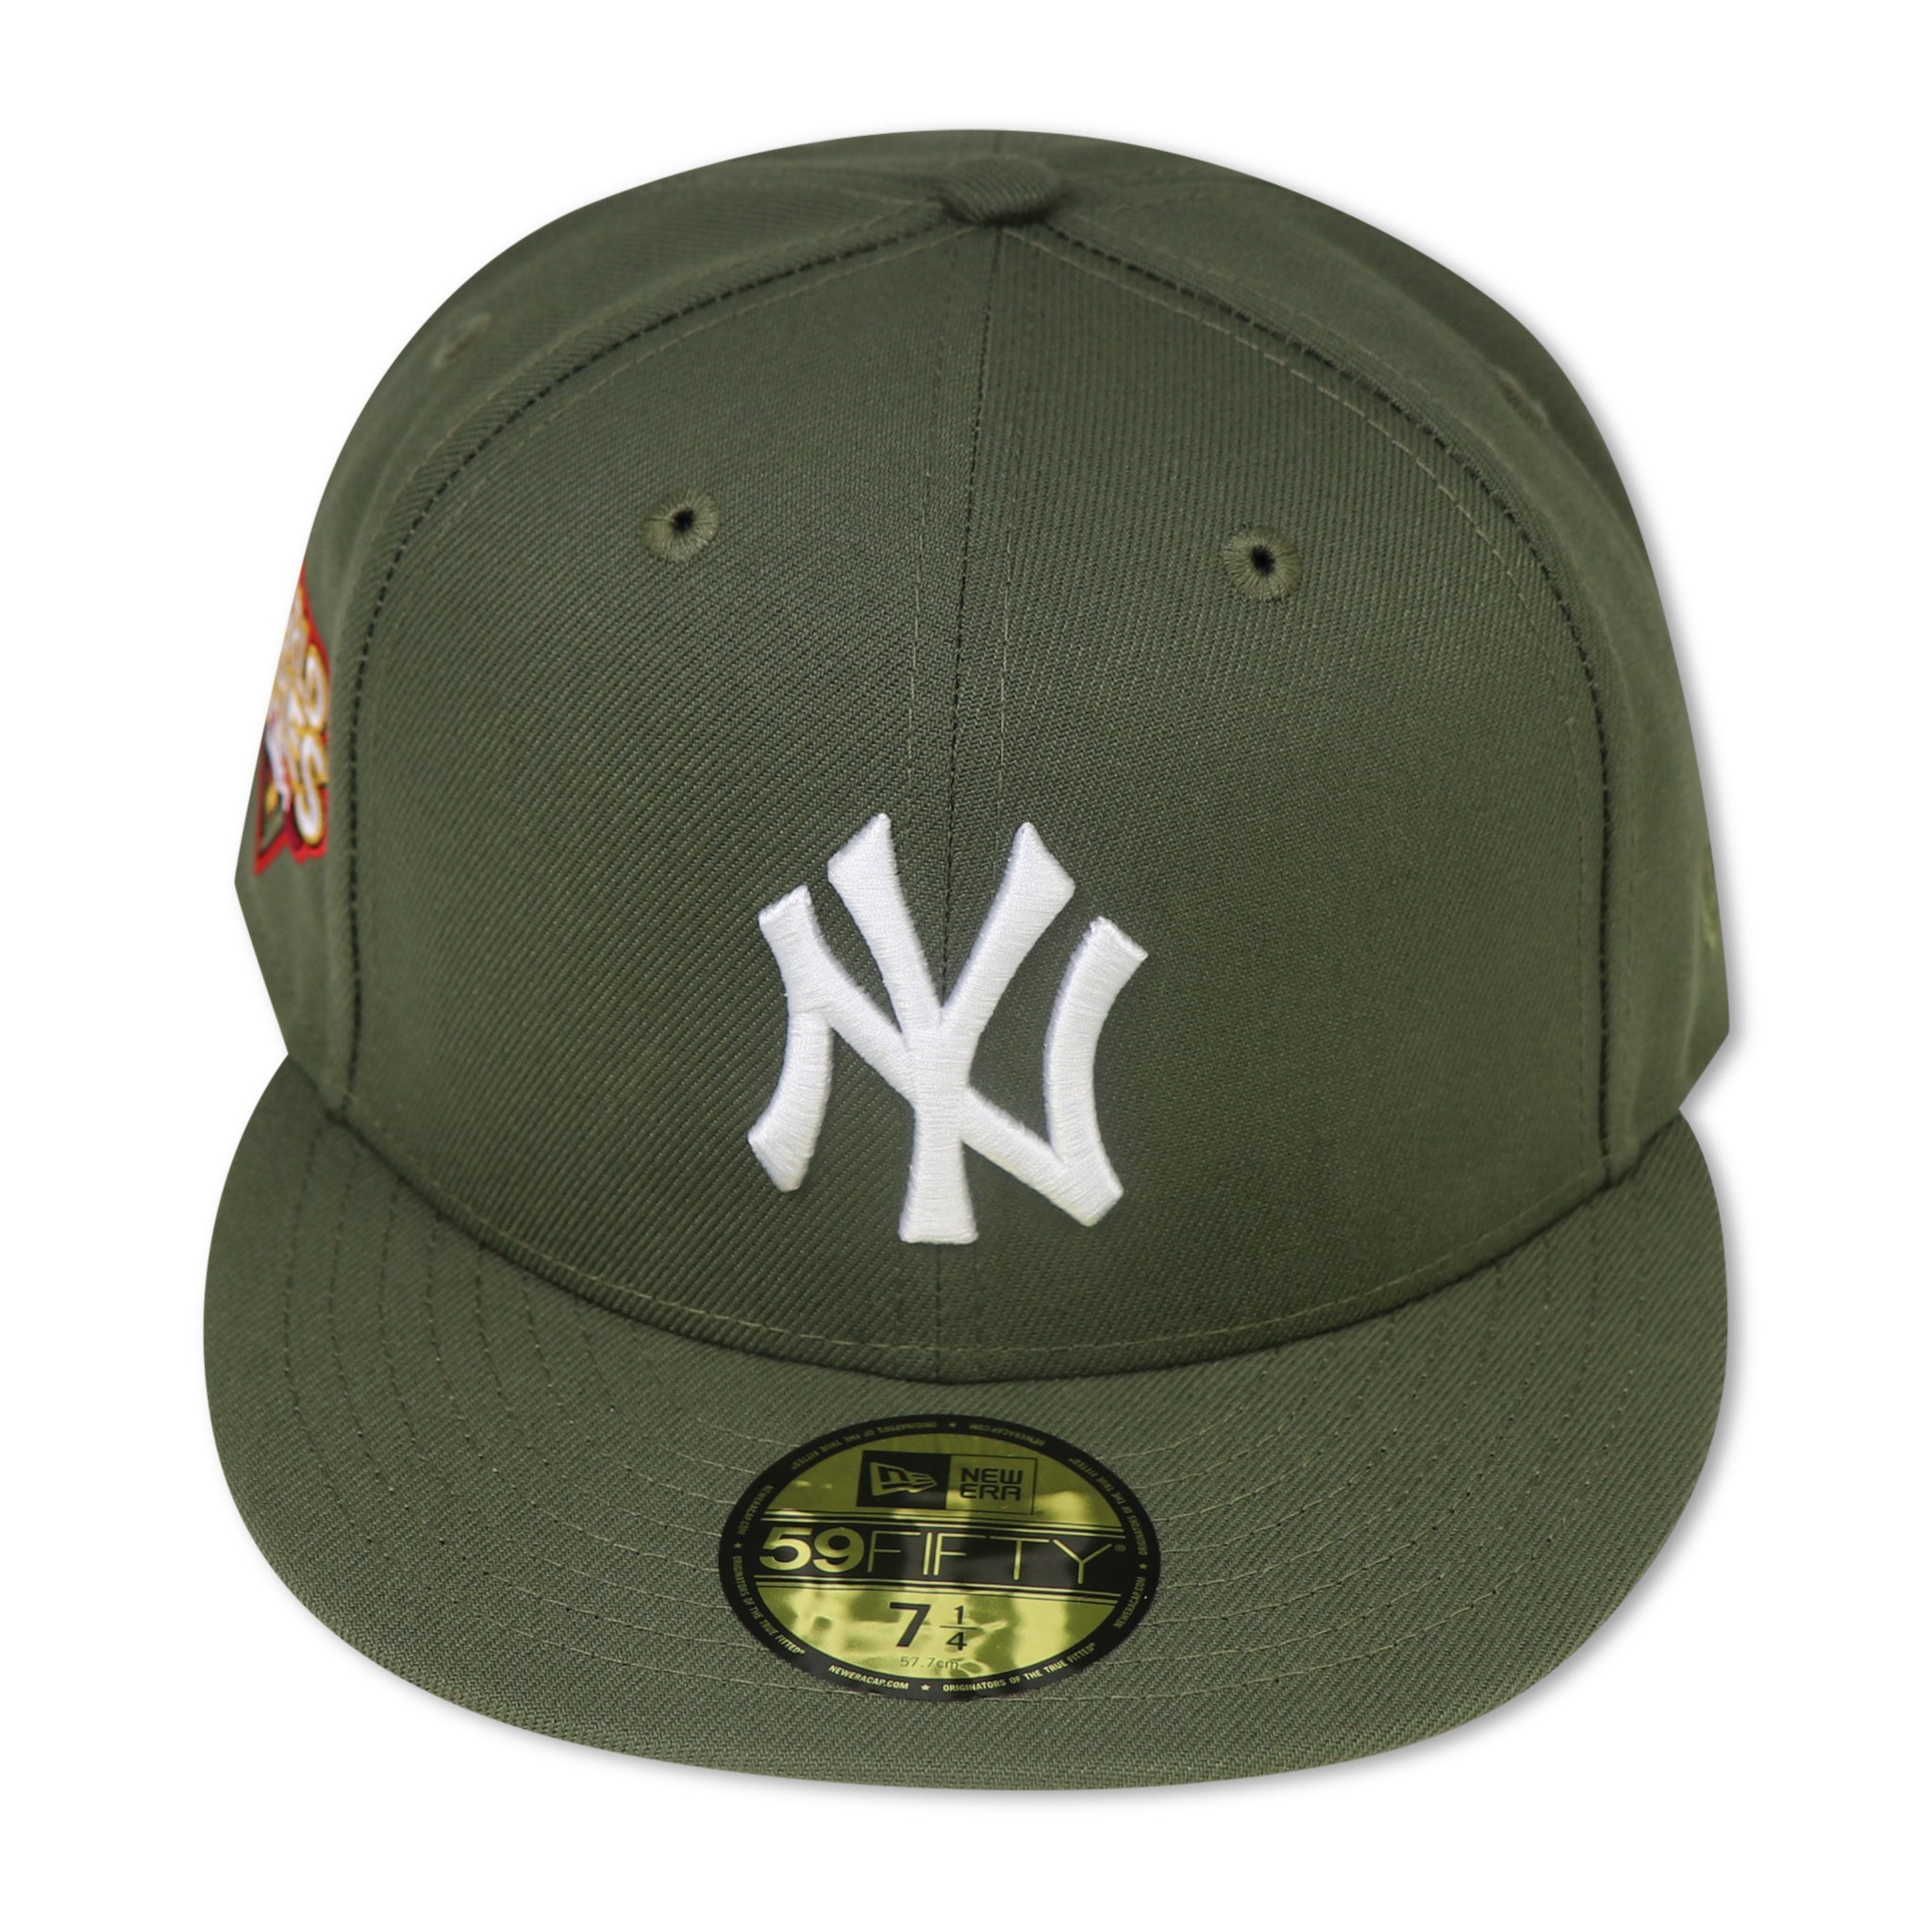 NEW YORK YANKEES (OLIVE) "2009 WORLDSERIES" NEW ERA 59FIFTY FITTED (RED BOTTOM)